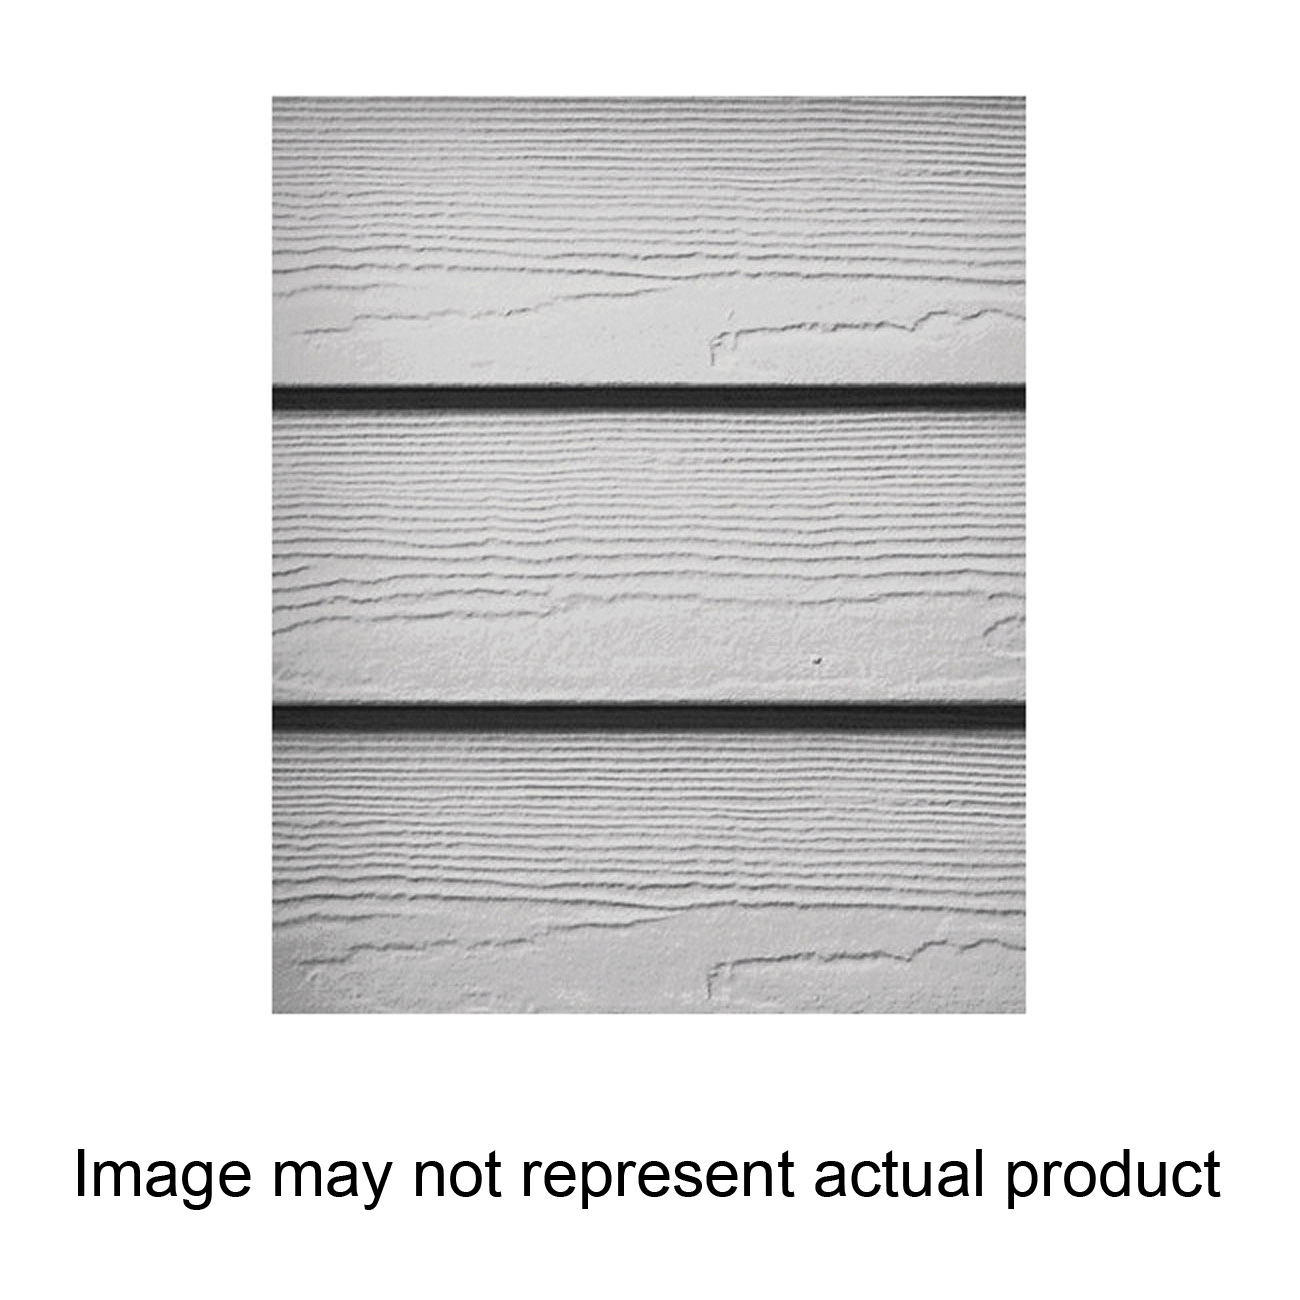 HardiePanel 215607 Fiber Cement Lap Siding, Prime-Coated, 12 in W, 144 in L, 0.312 in Thickness